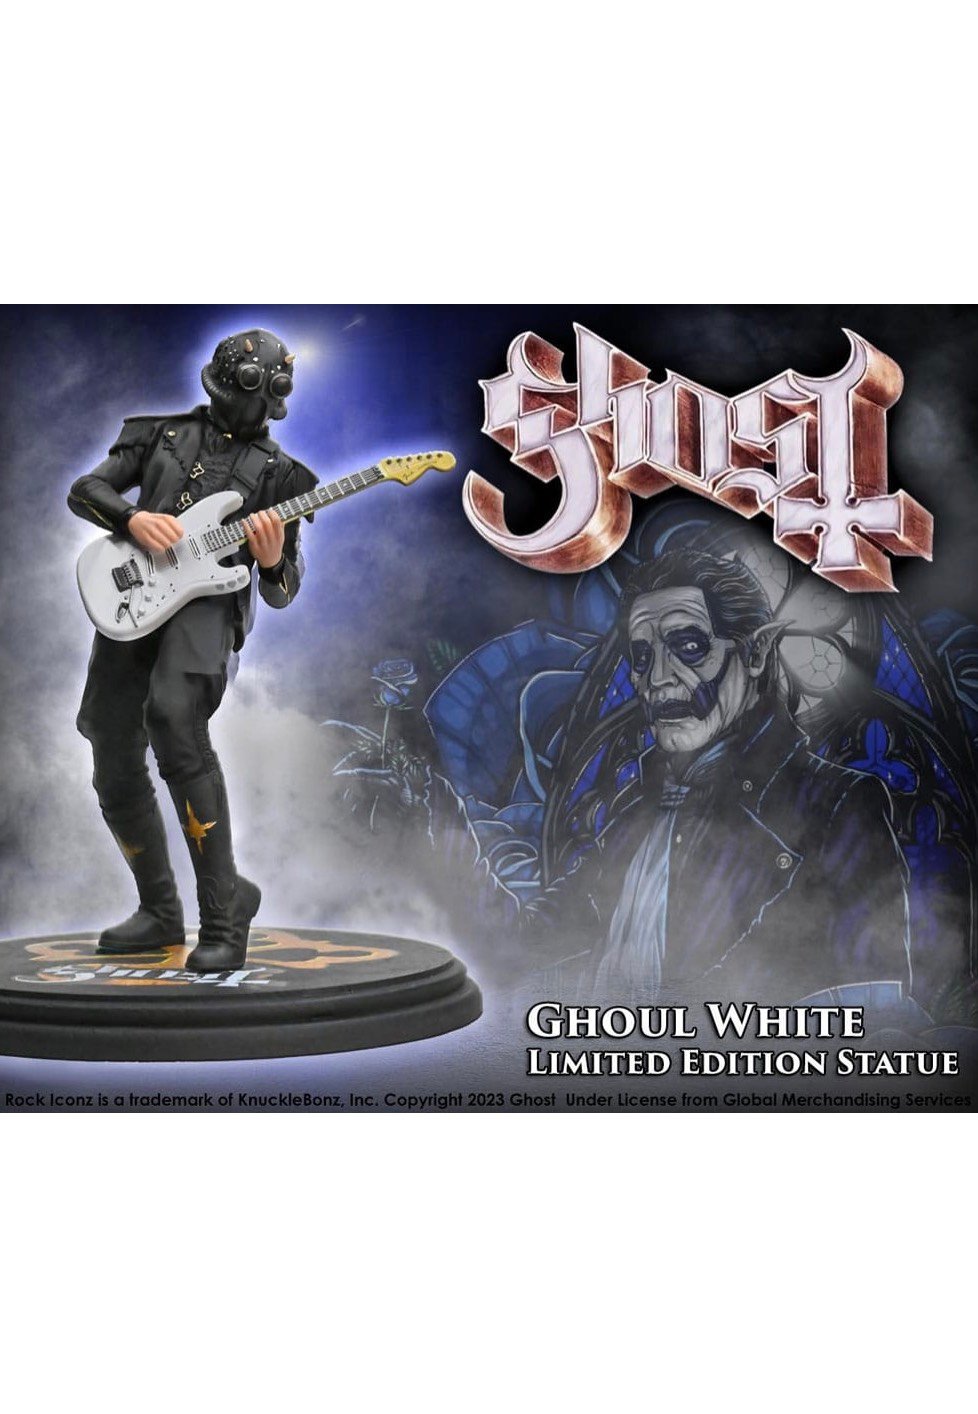 Ghost - Nameless Ghoul II (White Guitar) 1/9 Rock Iconz - Statue